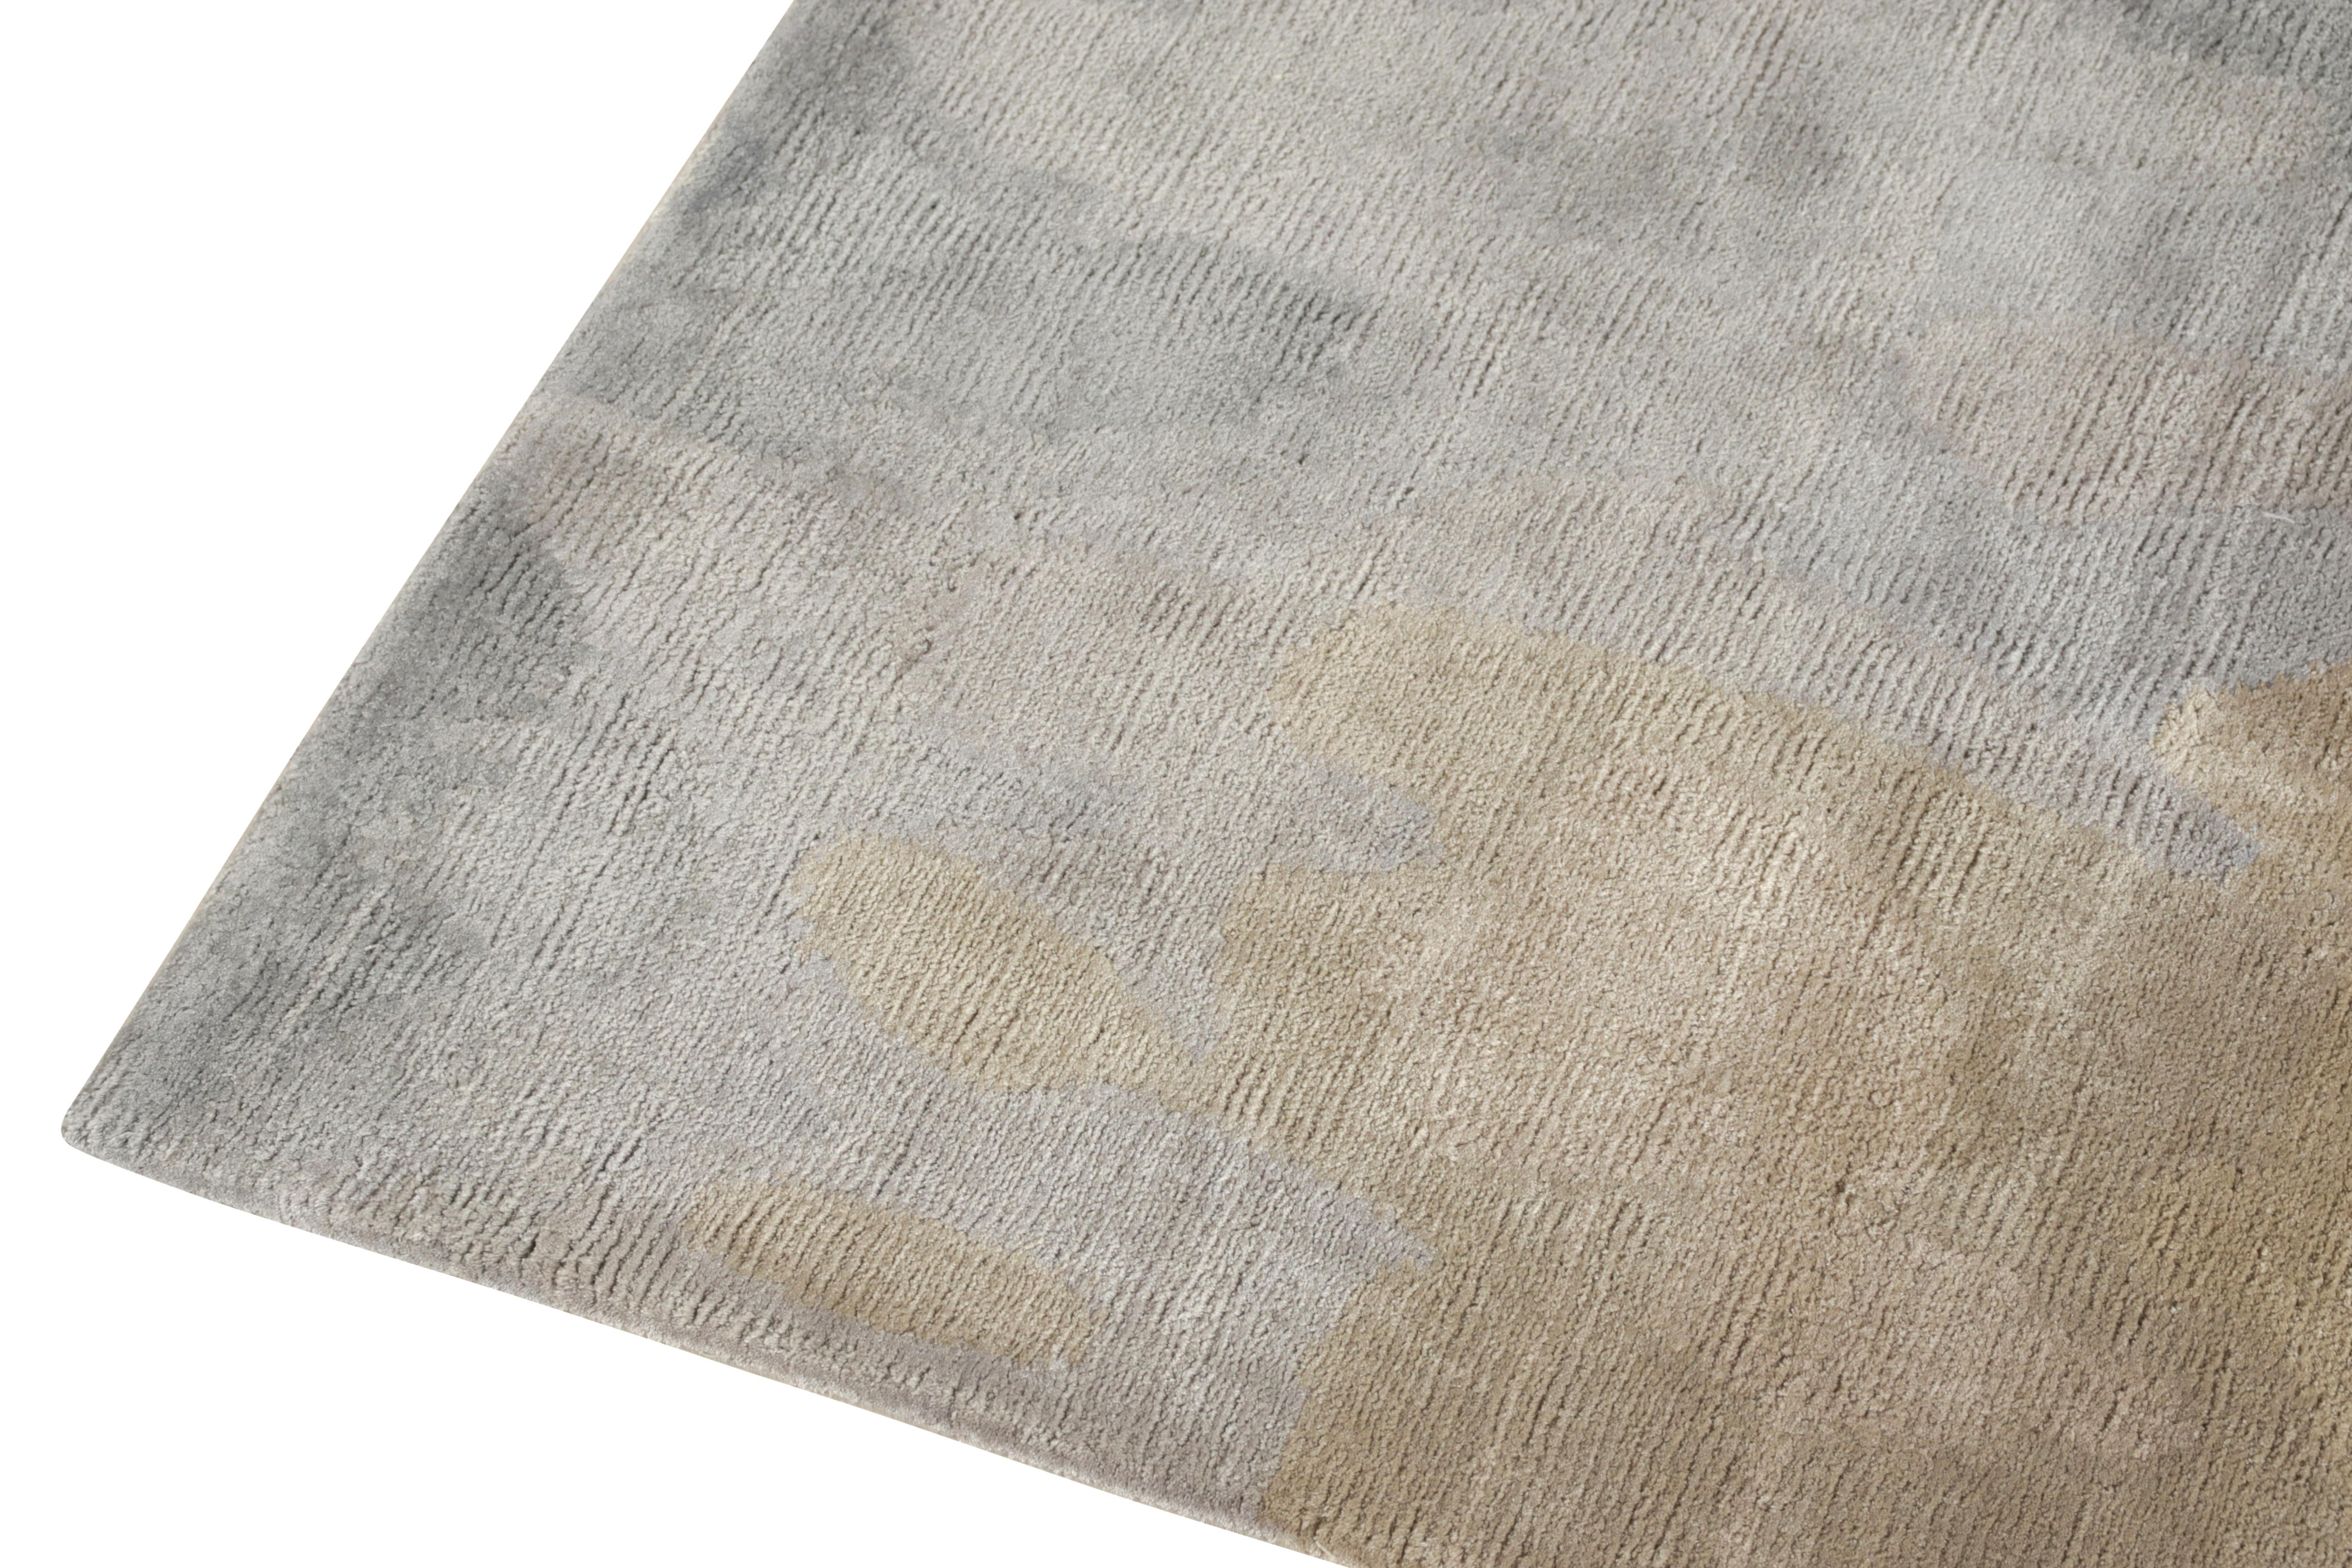 Indian Rug & Kilim’s Hand-Knotted Abstract Accent Rug in Silver, Beige-Brown Pattern